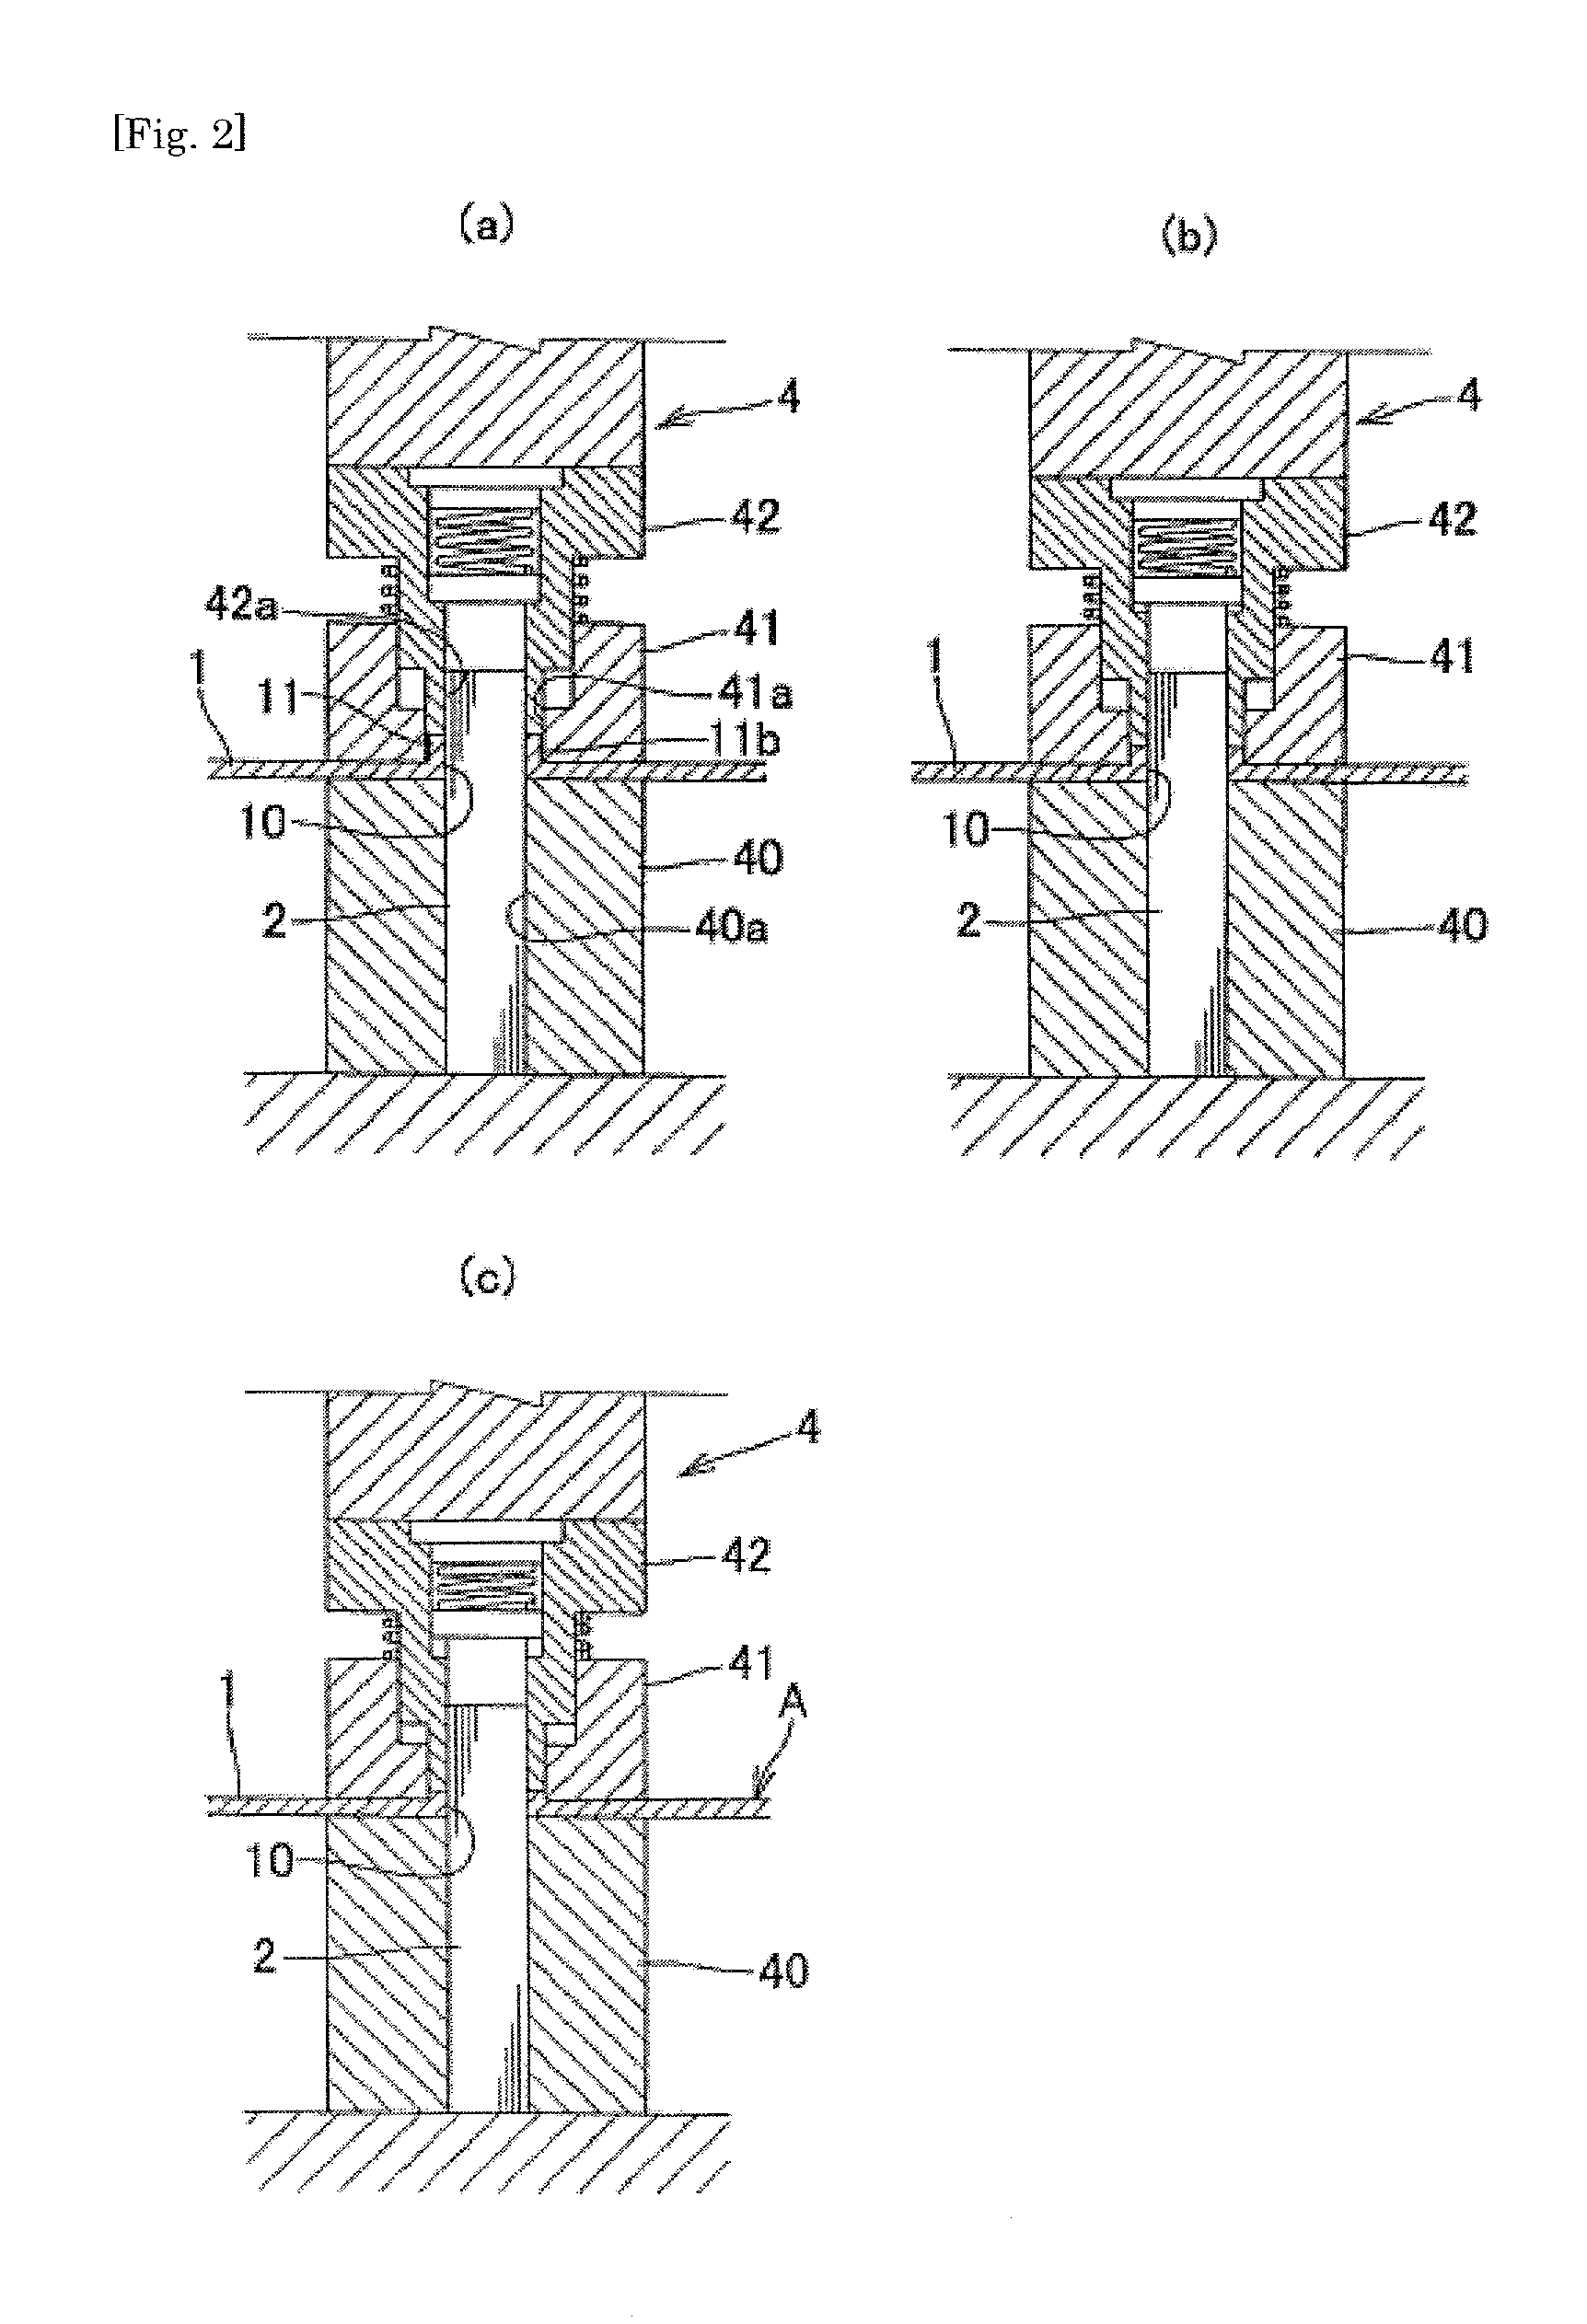 Method for manufacturing a caulked assembly